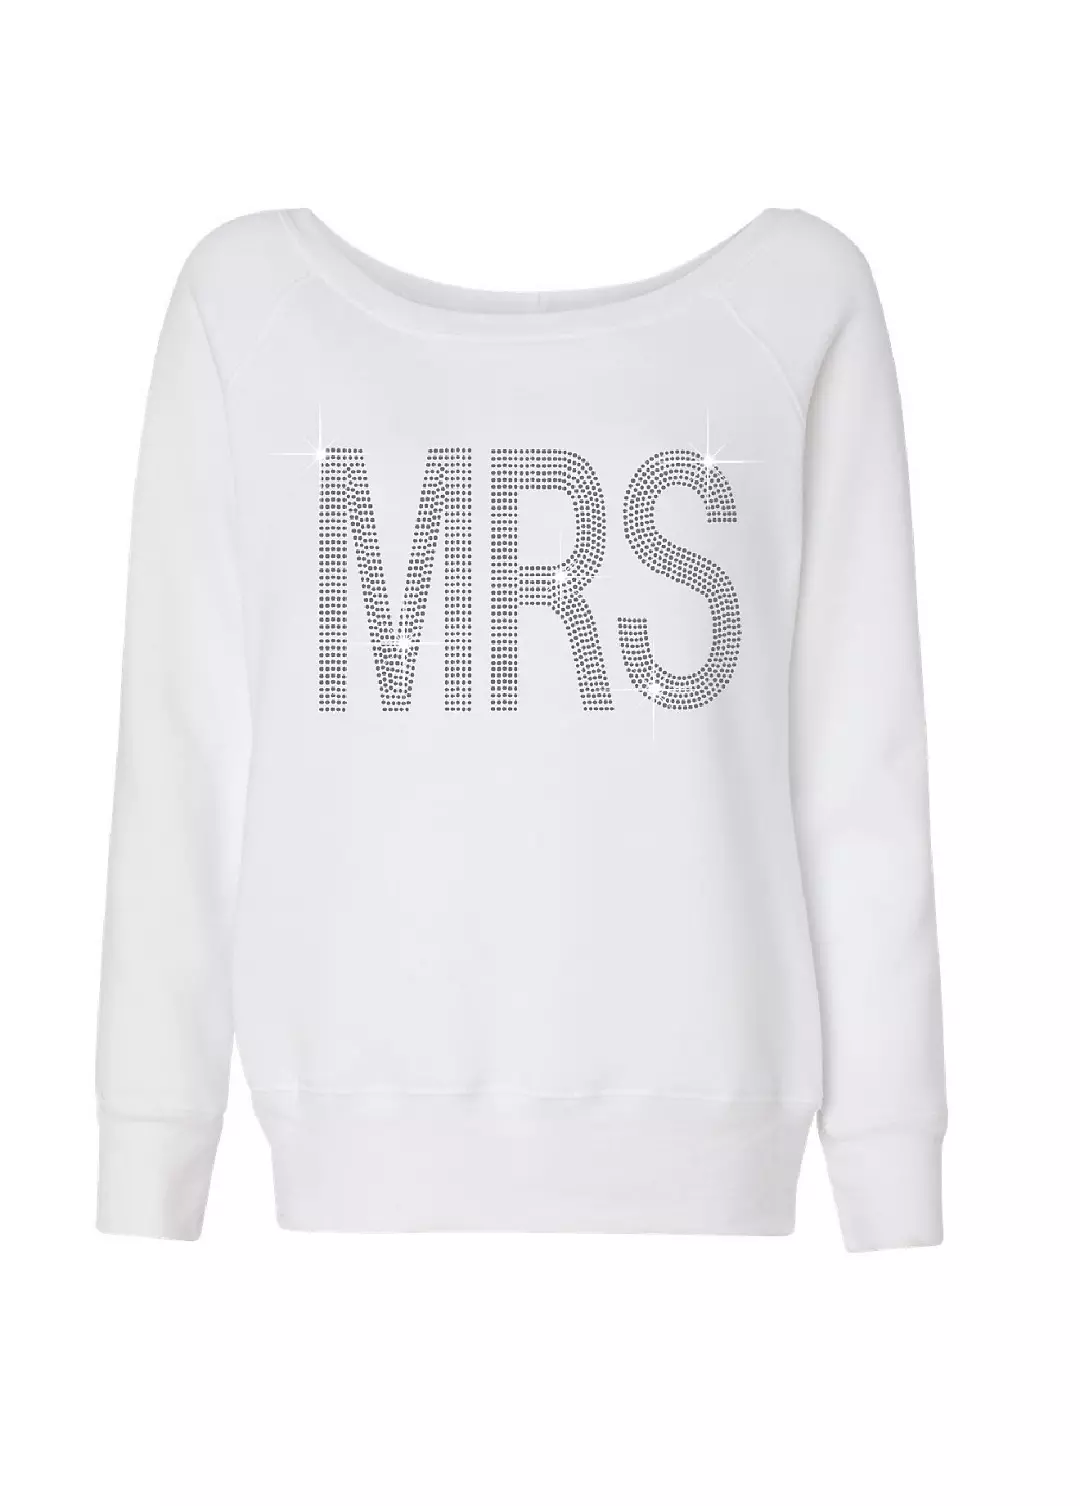 Ultimate Bling Mrs Slouchy French Terry Shirt Image